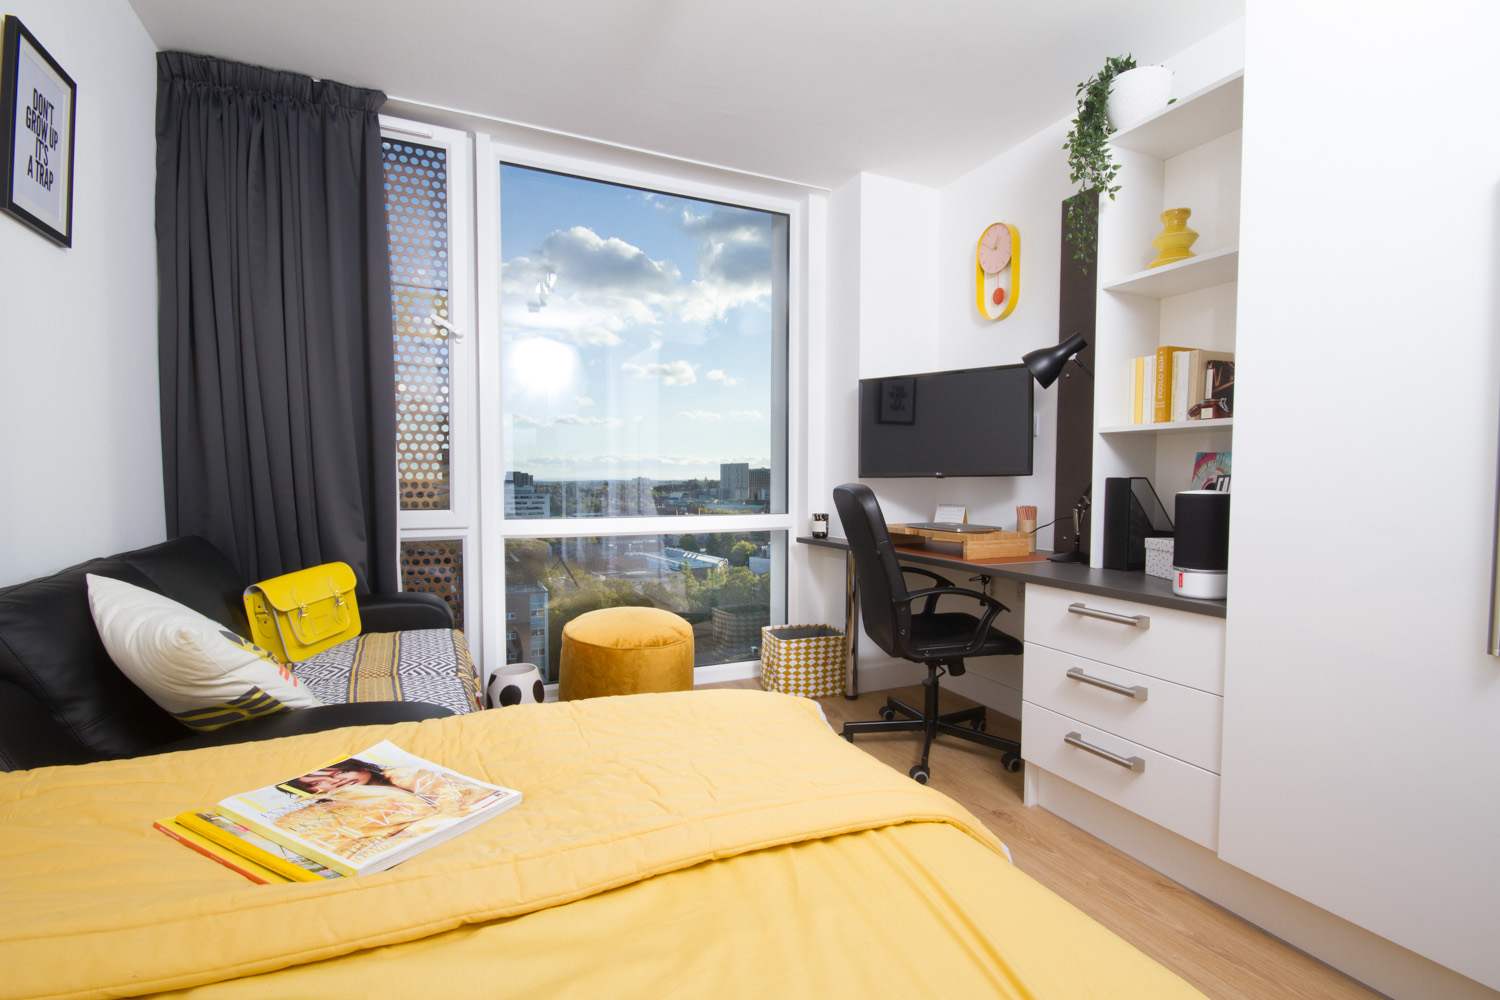 Skyline Deluxe Studio at CODE Student Accommodation Coventry